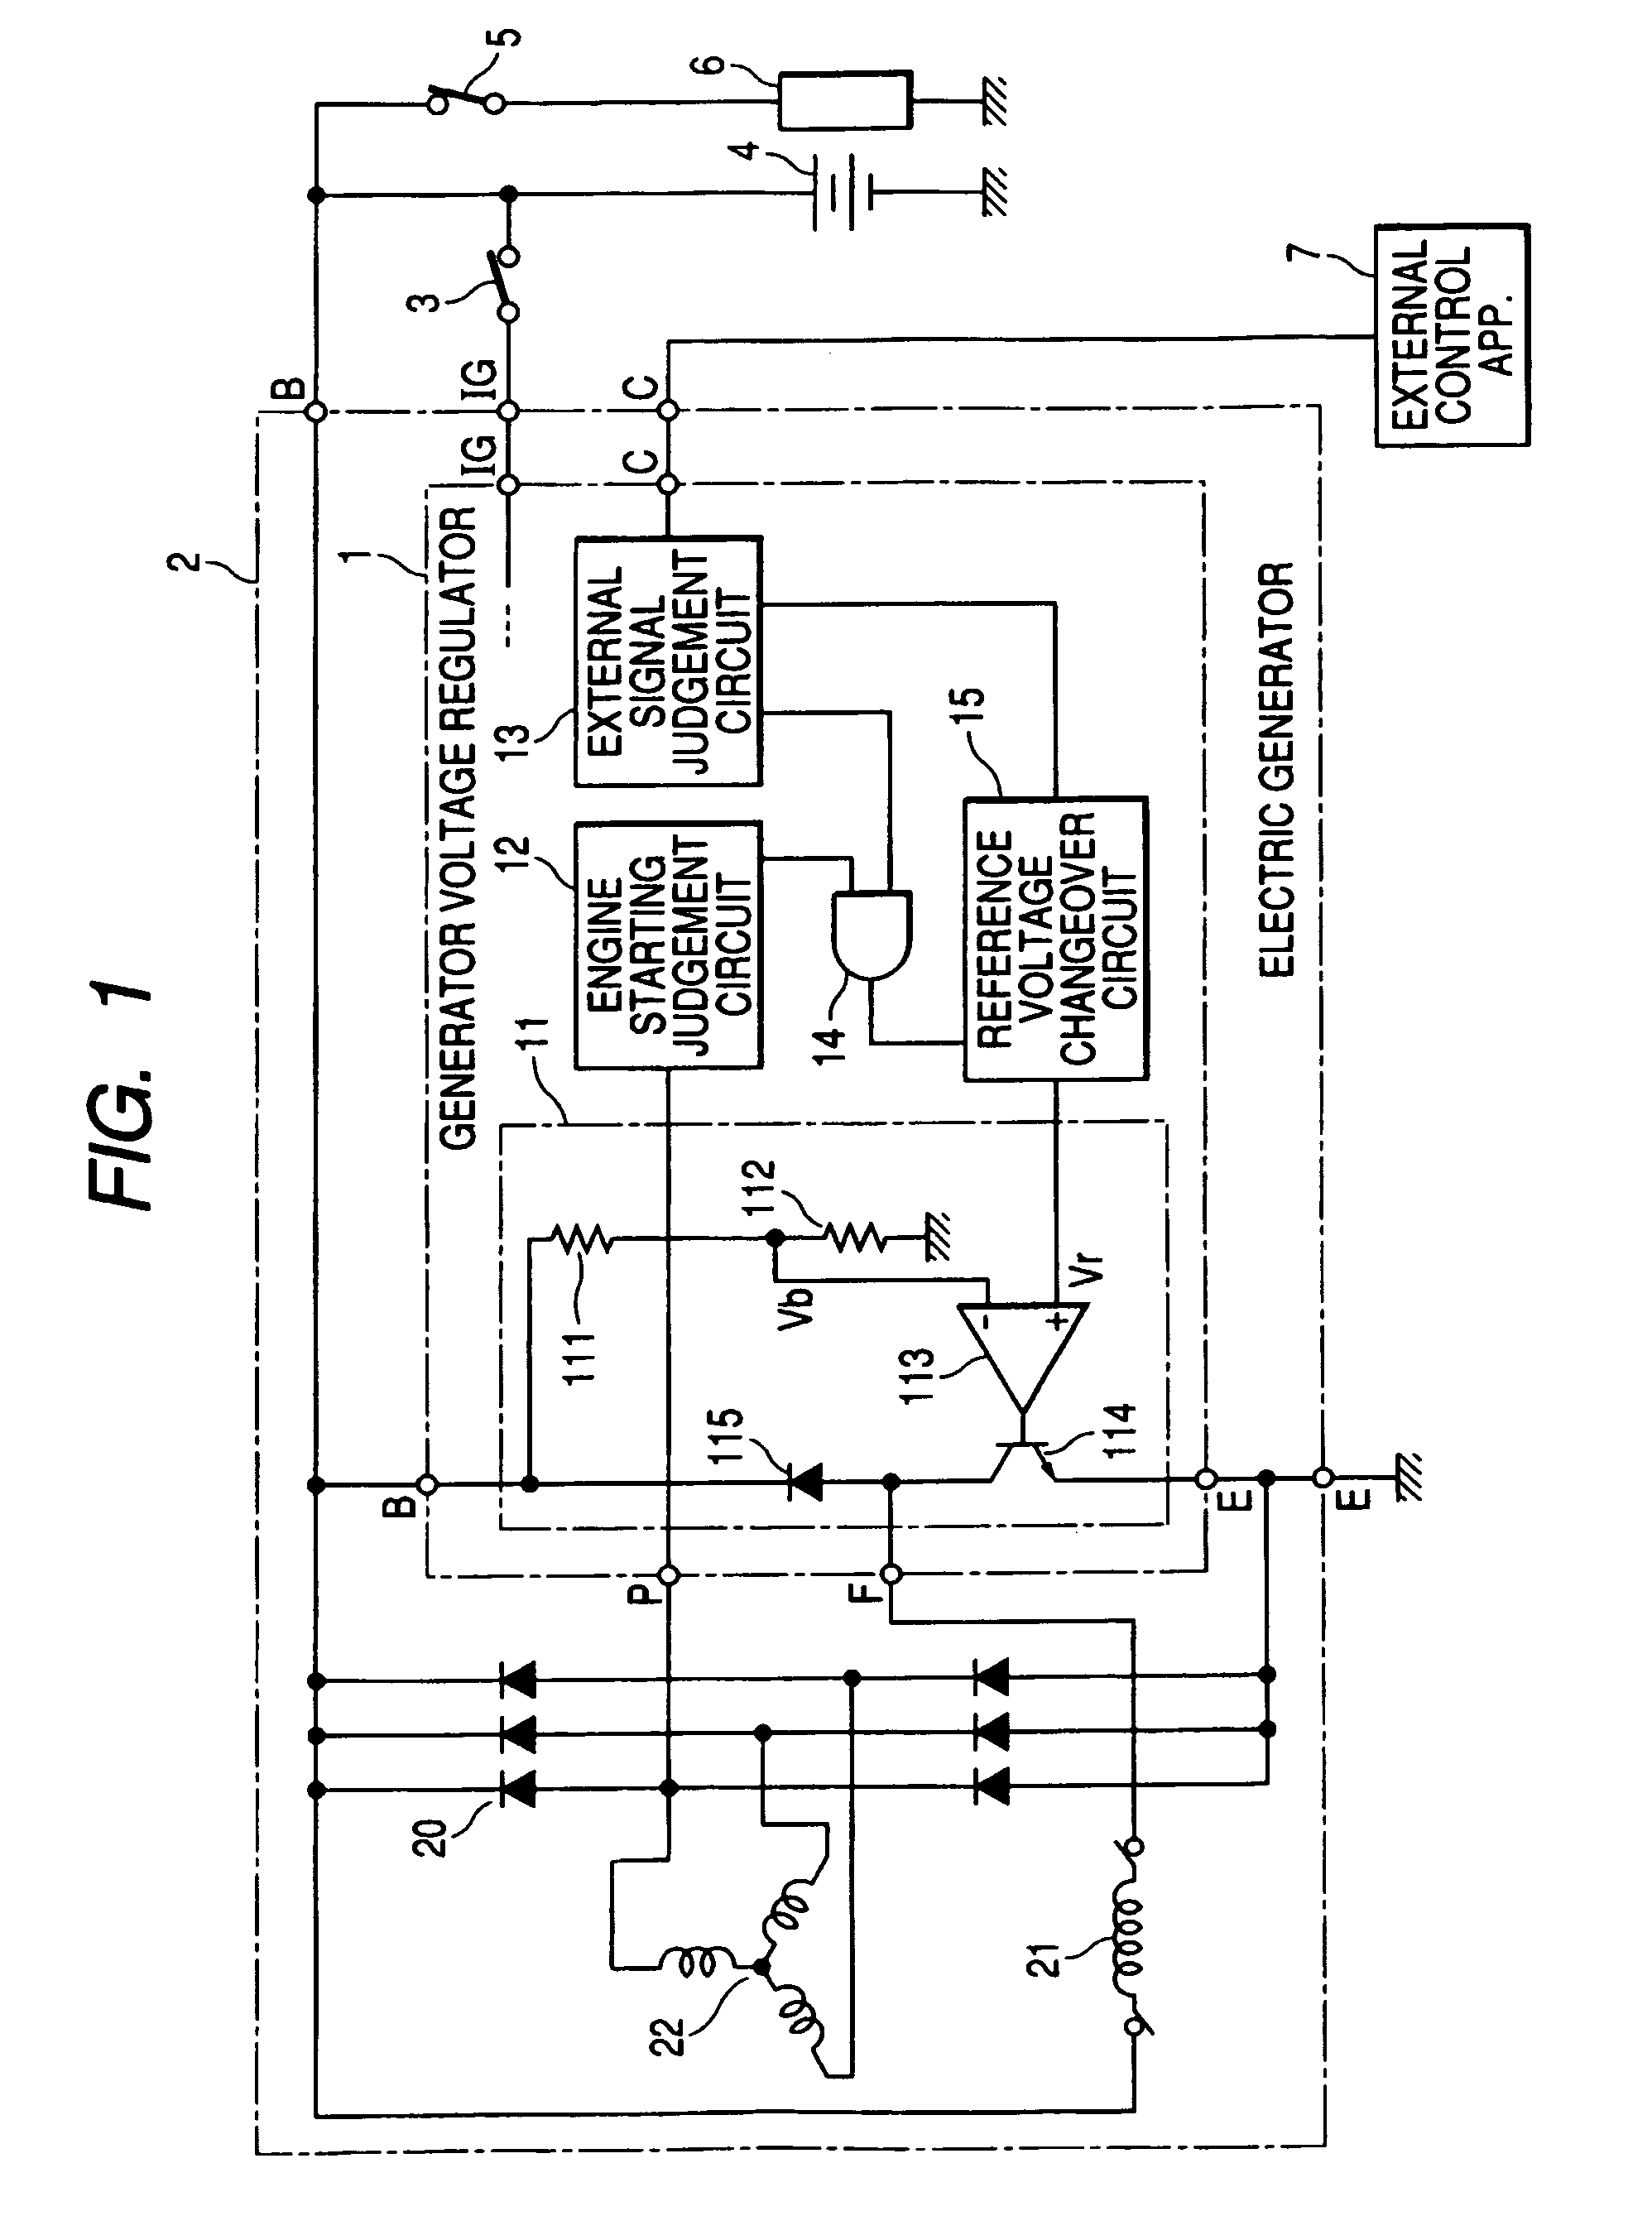 Voltage control apparatus for electric generator of vehicle